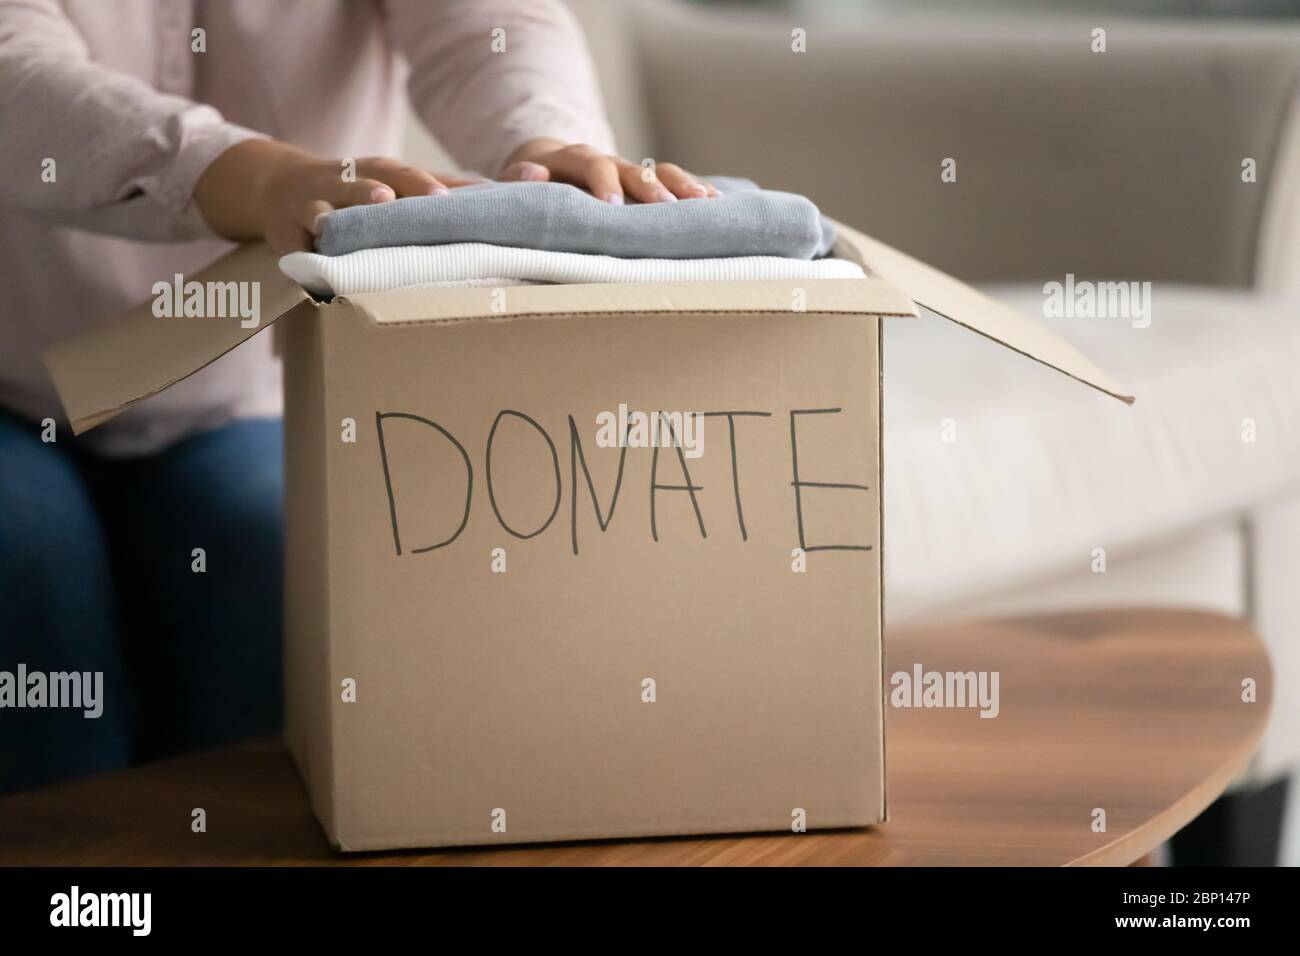 Woman prepared box with old stuff for donation closeup image Stock Photo